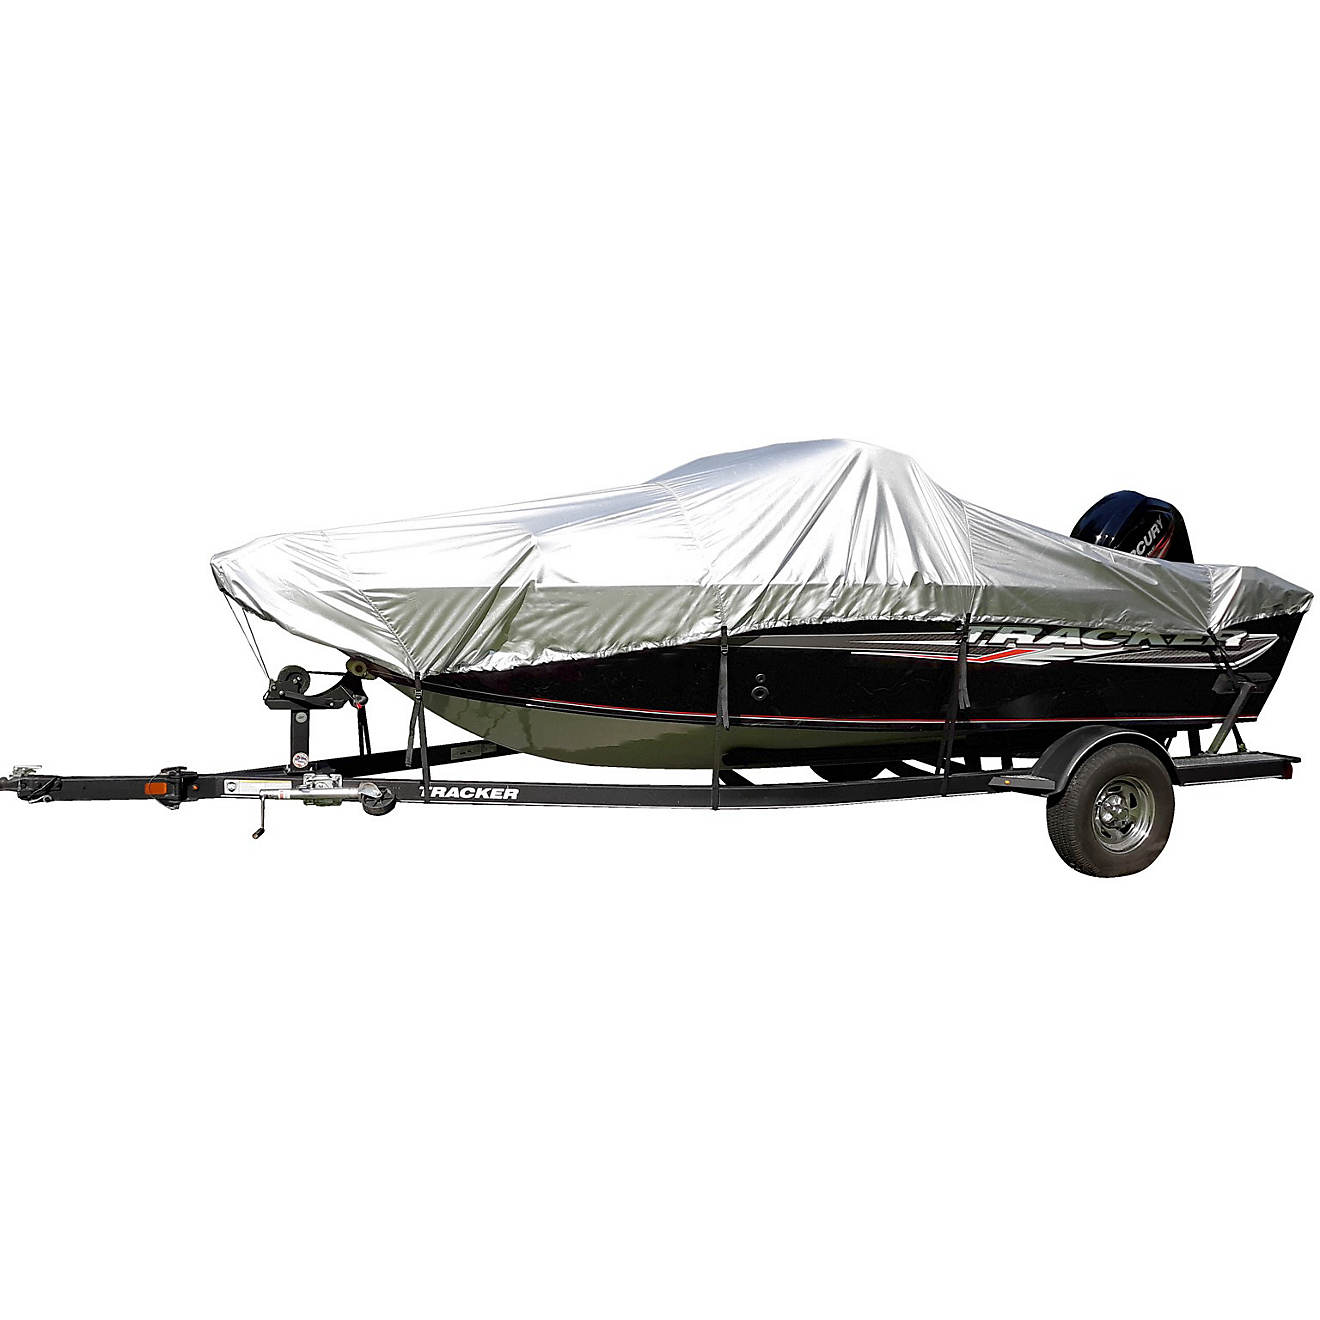 TaylorMade 16-19 ft Boatguard Fish'n'Ski Boat Cover                                                                              - view number 1